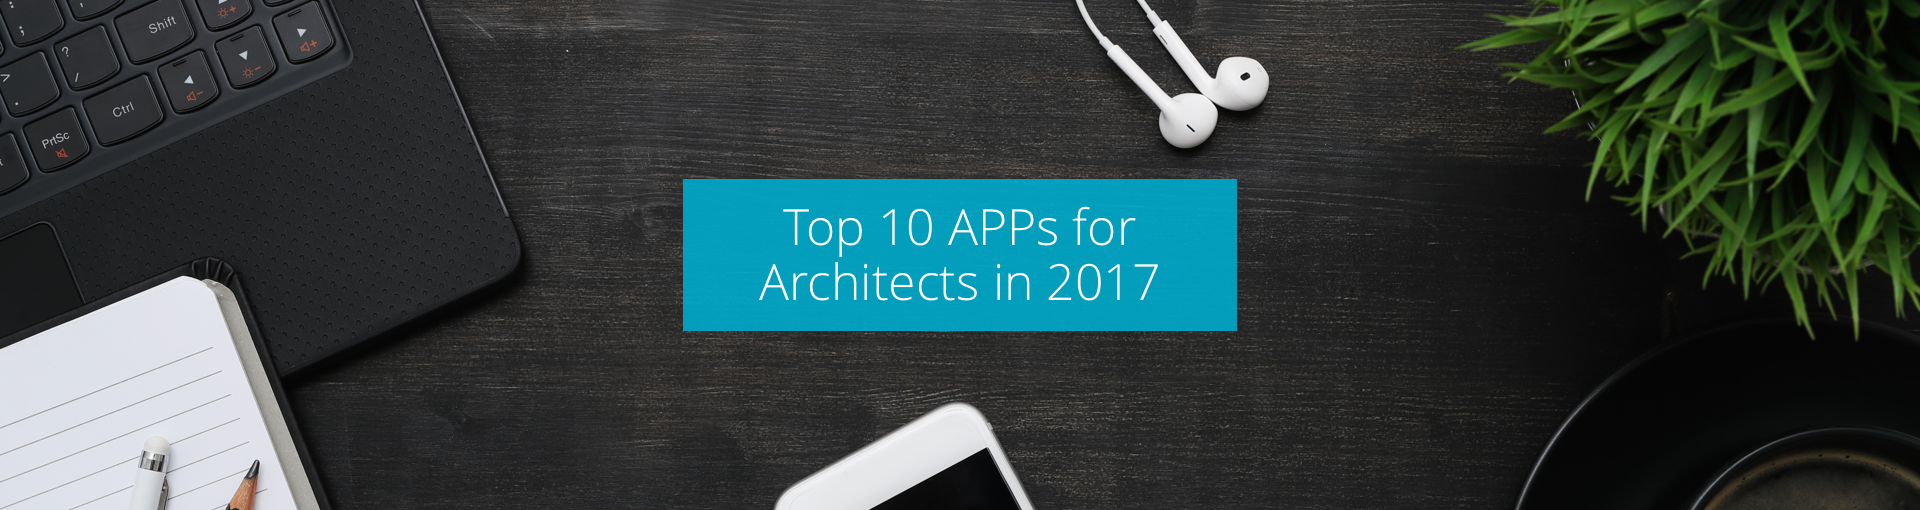 Top 10 APPs for Architects in 2017 Featured Image